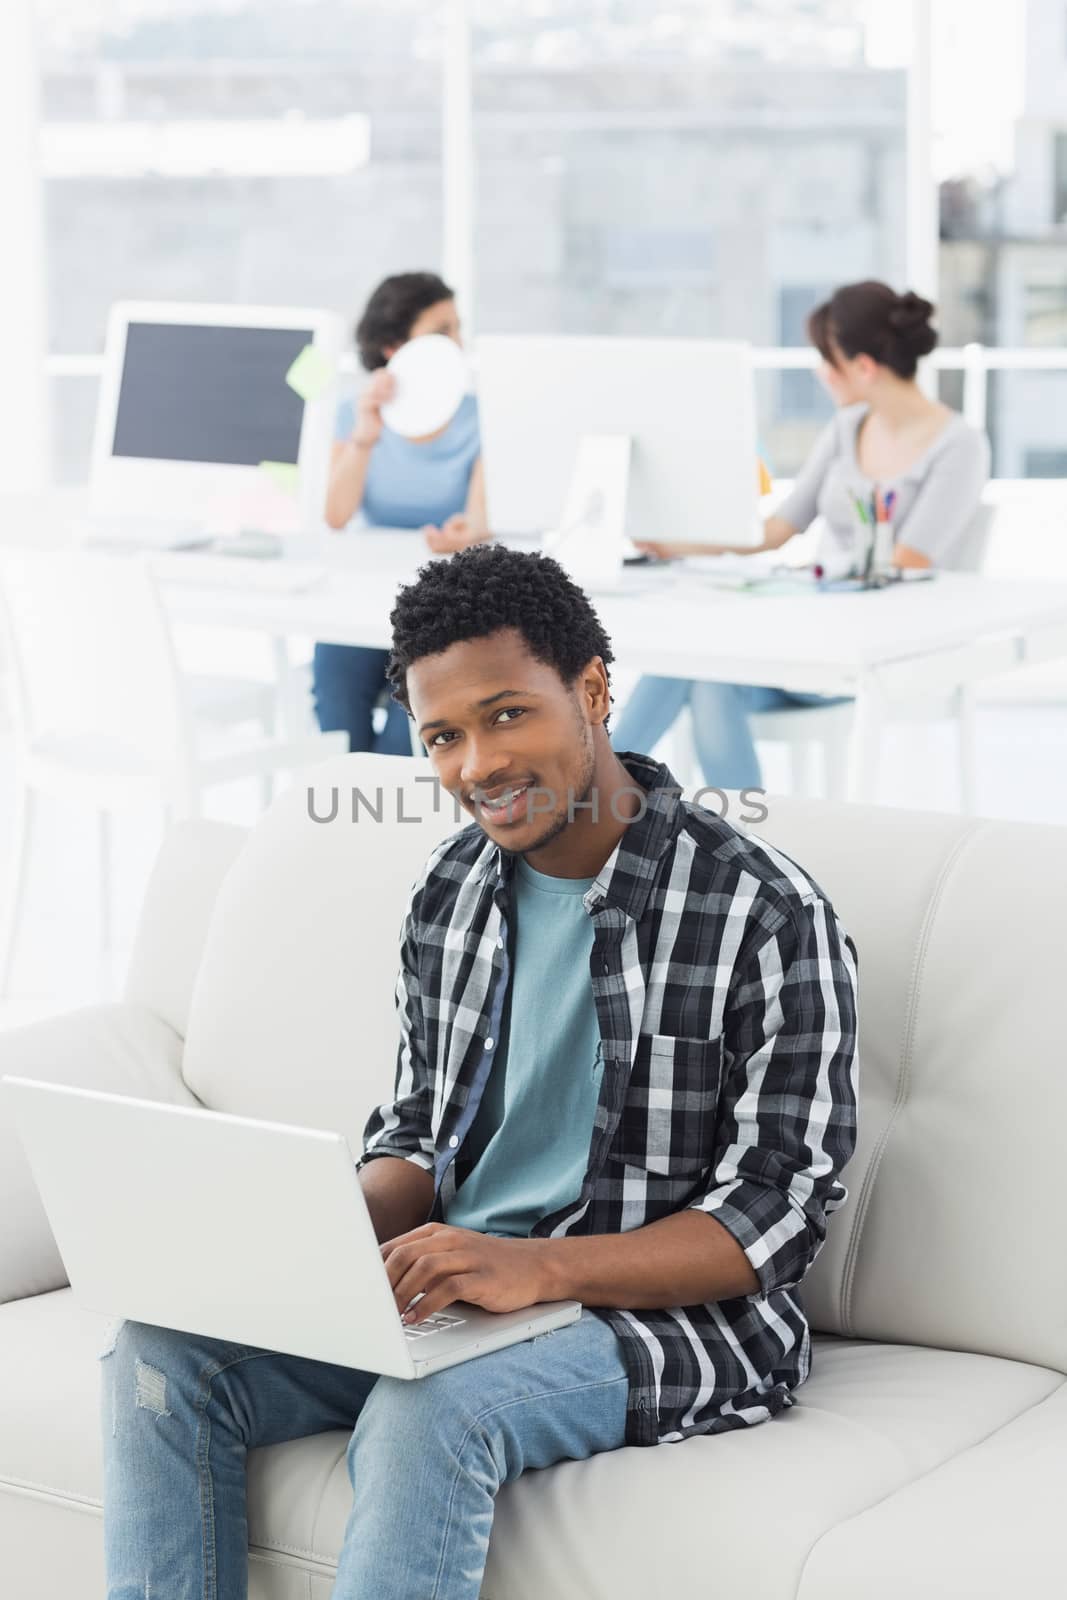 Young man using laptop with colleagues in background at a creative bright office